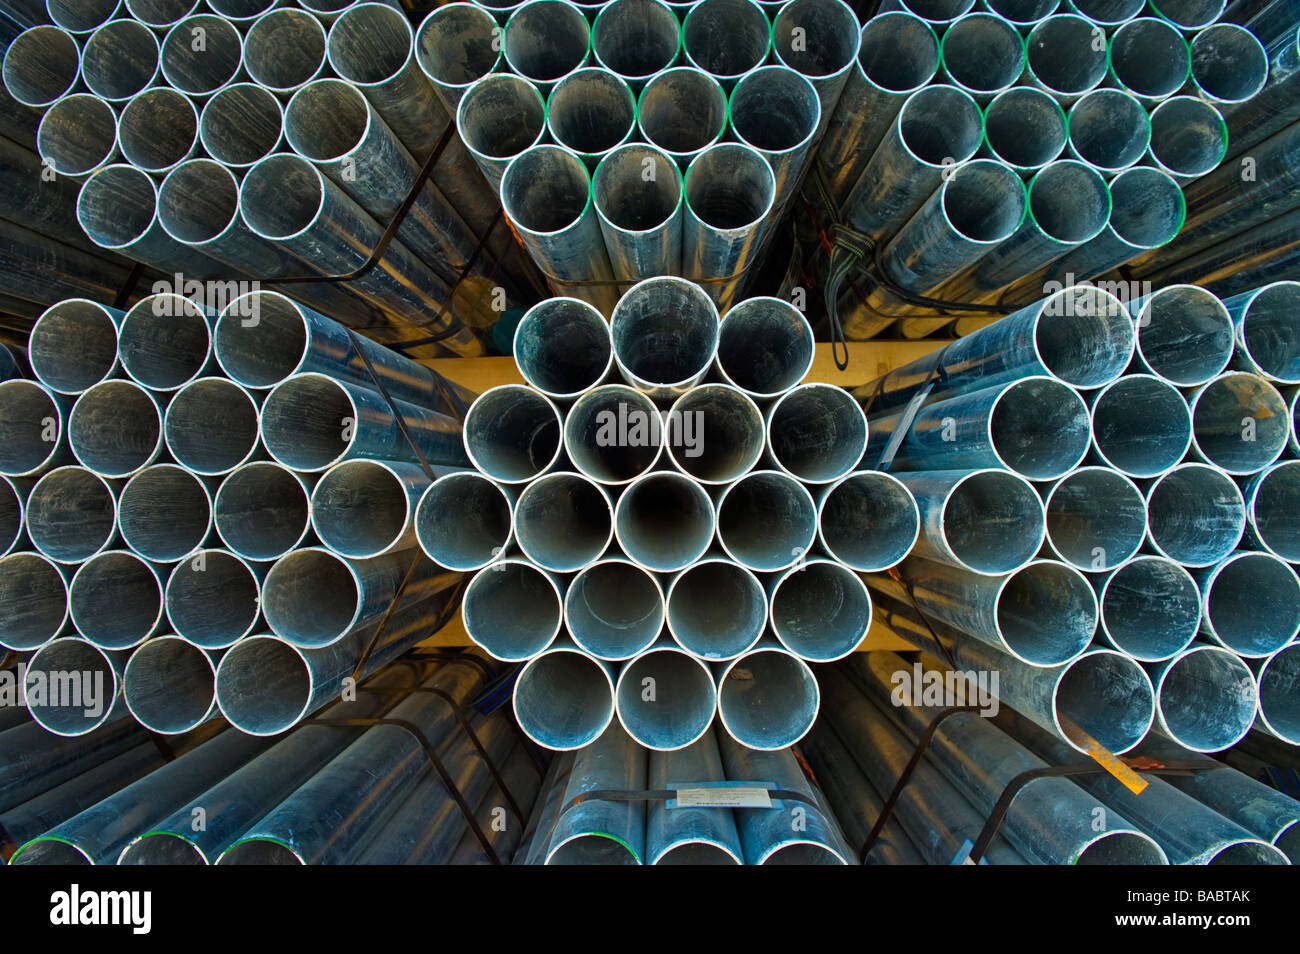 pipework plumbing iron steel tube pipe duct tubes in mill lengths sell seller stor storage industry trade tarding commerce traff Stock Photo